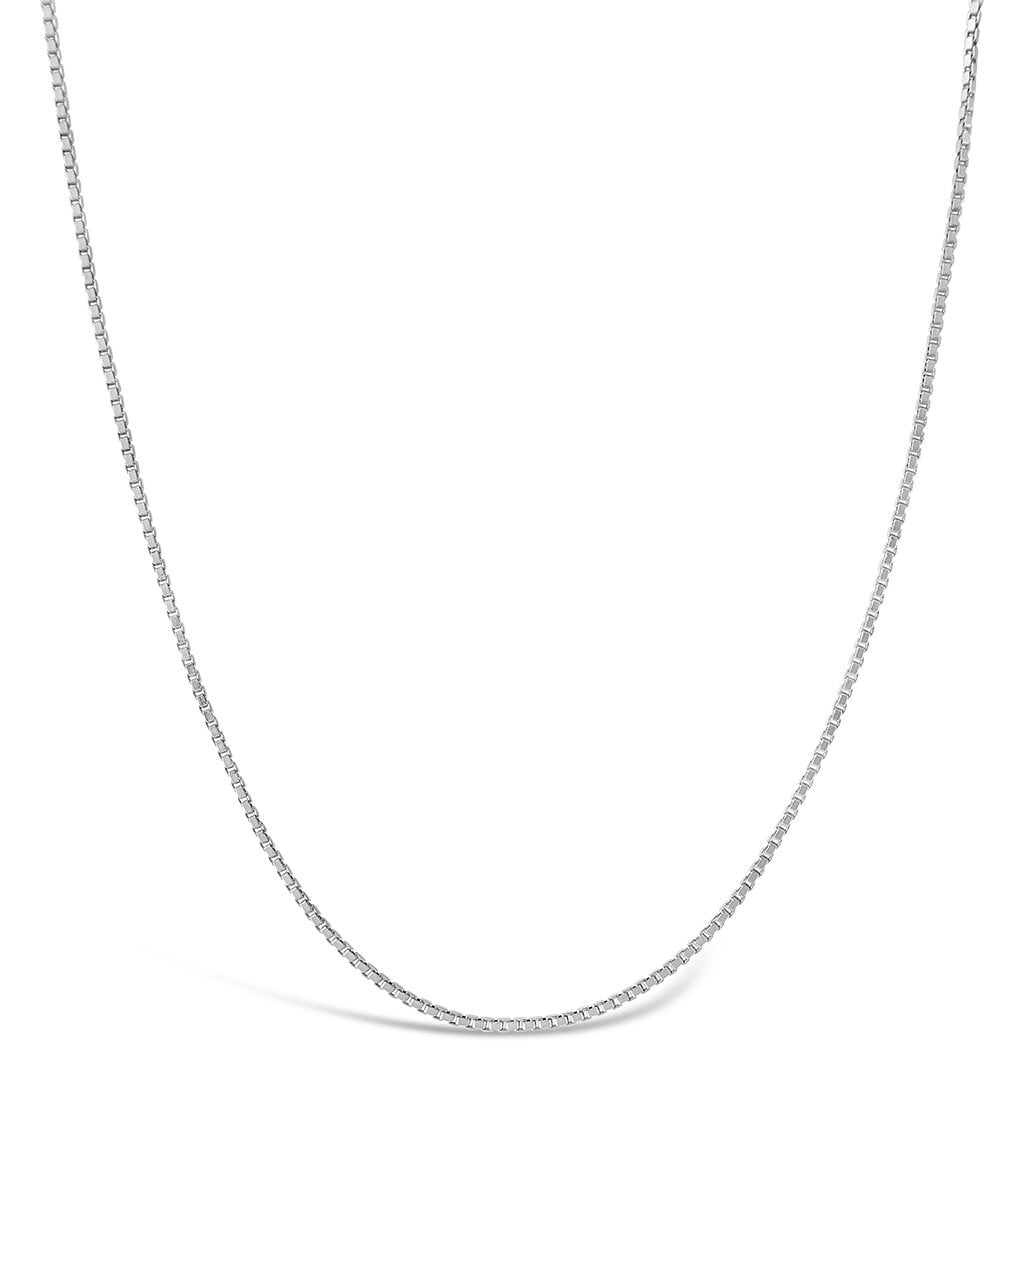 Men's Sterling Silver Venetian Chain Necklace Accessories Sterling Forever Silver 16" 